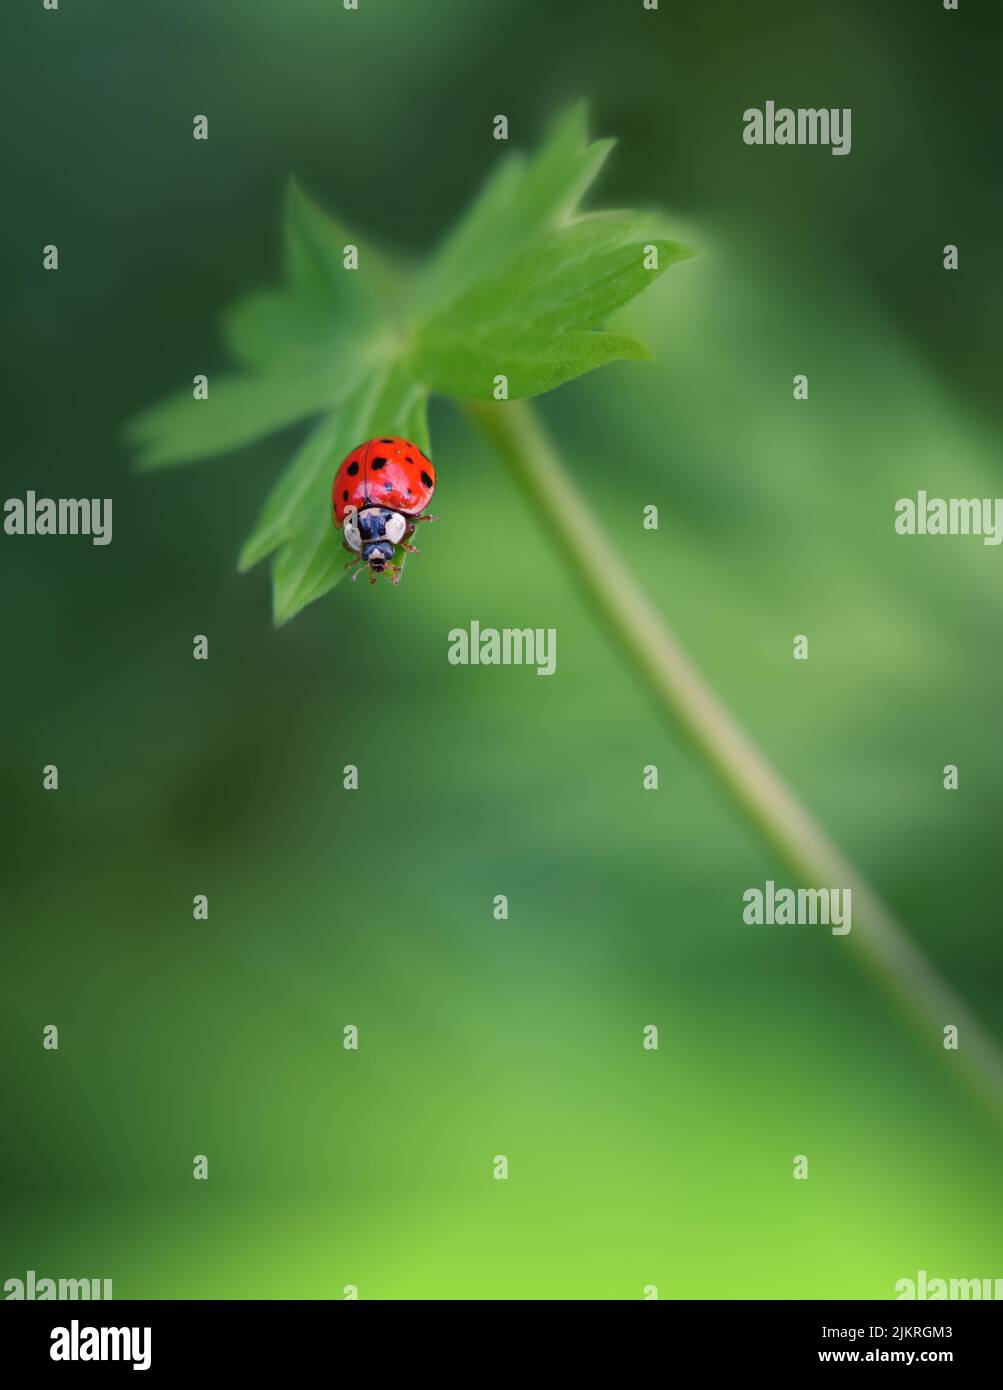 Beautiful Green Nature Background.Wild Field.Close up Scene.Summer Landscape.Creative Artistic Wallpaper.Red Ladybug.Green Color.Animal in a Meadow. Stock Photo